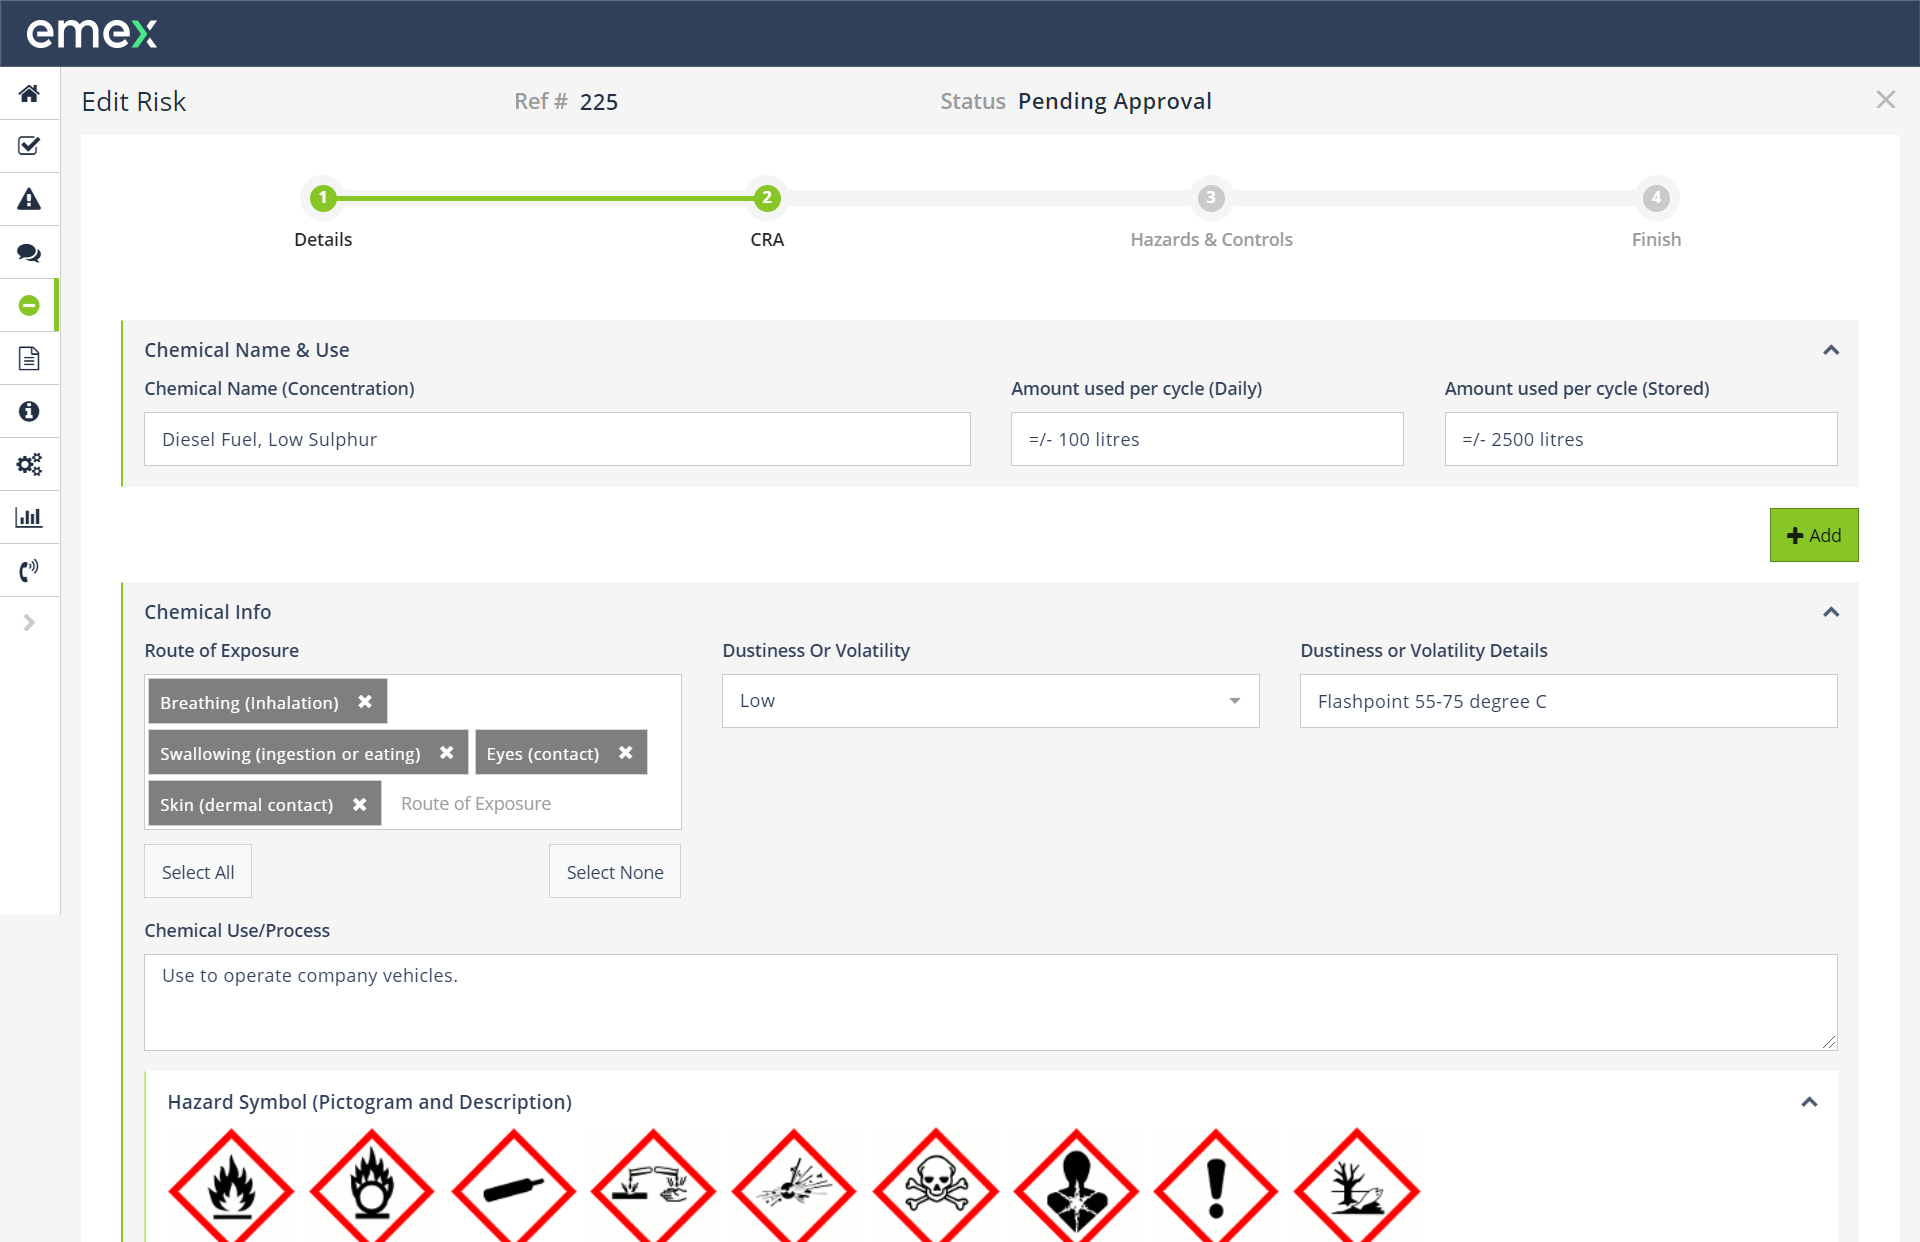 Configure dynamic risk assessments based on your organisation’s template requirements for any activity, equipment, chemicals, etc.